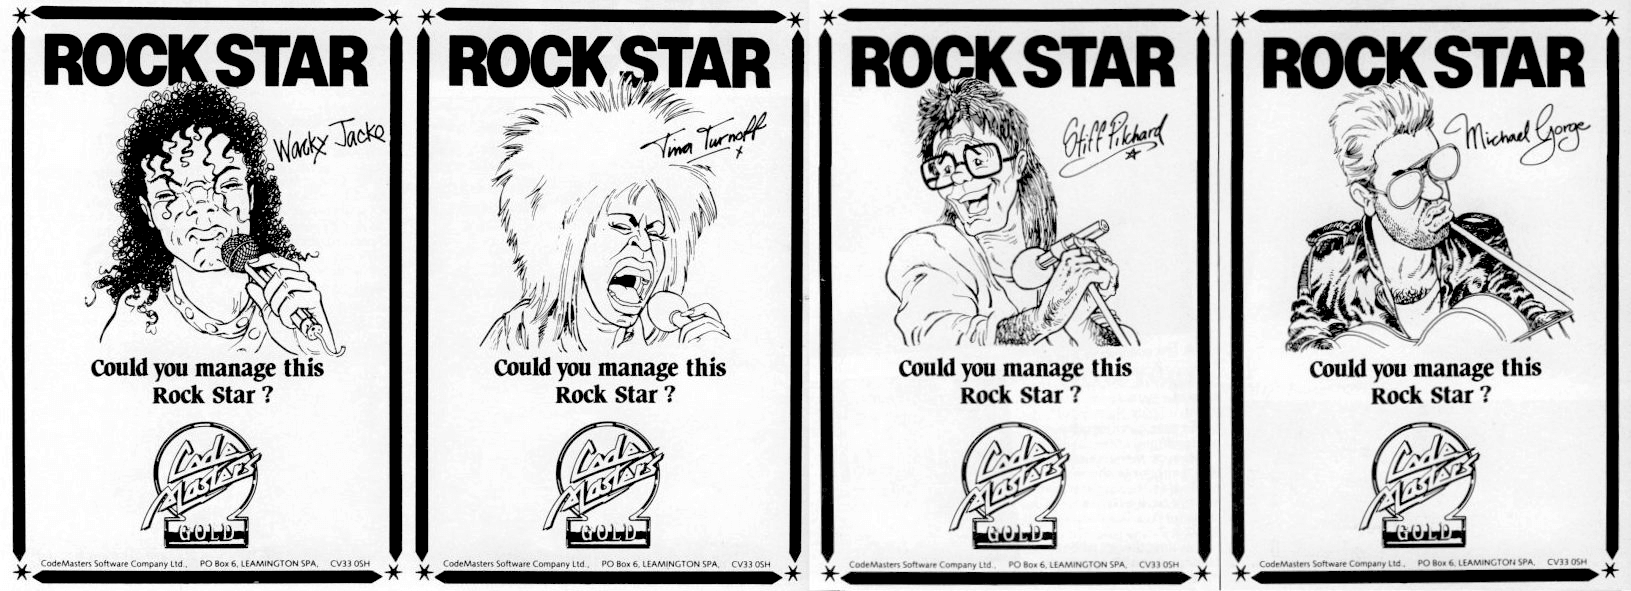 Image For Post | Rock Star Ate My Hamster is a management strategy computer game developed by Codemasters in 1988 and originally released on their full-price Gold label for the Amstrad CPC, ZX Spectrum, Commodore 64, Amiga and Atari ST. The game was written by Colin Jones, later to become known as author/publisher Colin Bradshaw-Jones.

**Objective**  
To win the game, one must select a band, record an album and earn 4 gold discs within the space of a year. If the player fails to meet this target, go bankrupt or have no musicians left, the game is over. 

**Musicians**  
At the outset, the player can choose to hire up to four musicians to make up the band. The musicians are parodies of contemporary pop music stars. Their weekly wage depends on their abilities and their fame, ranging from £30,000 for "Bill Collins" down to just £50 for "Sidney Sparkle". 

**Trivia**  
The name of the game was inspired by a 1986 Sun headline - 'Freddie Starr ate my hamster' - which served as a focal point for mid-1980s tabloid culture and helped further the career of the comic in question. 

**Controversy**  
The game is heavy on parody on existing people and names, which wasn't well received across the board: according to Jones, "an irate parent had taken objection to one of the jokes in the spoof newspaper included in the box and W H Smiths pulled the game from their shelves".[1]

**Alternate Titles**  
    "Rockstar" -- Alternate title